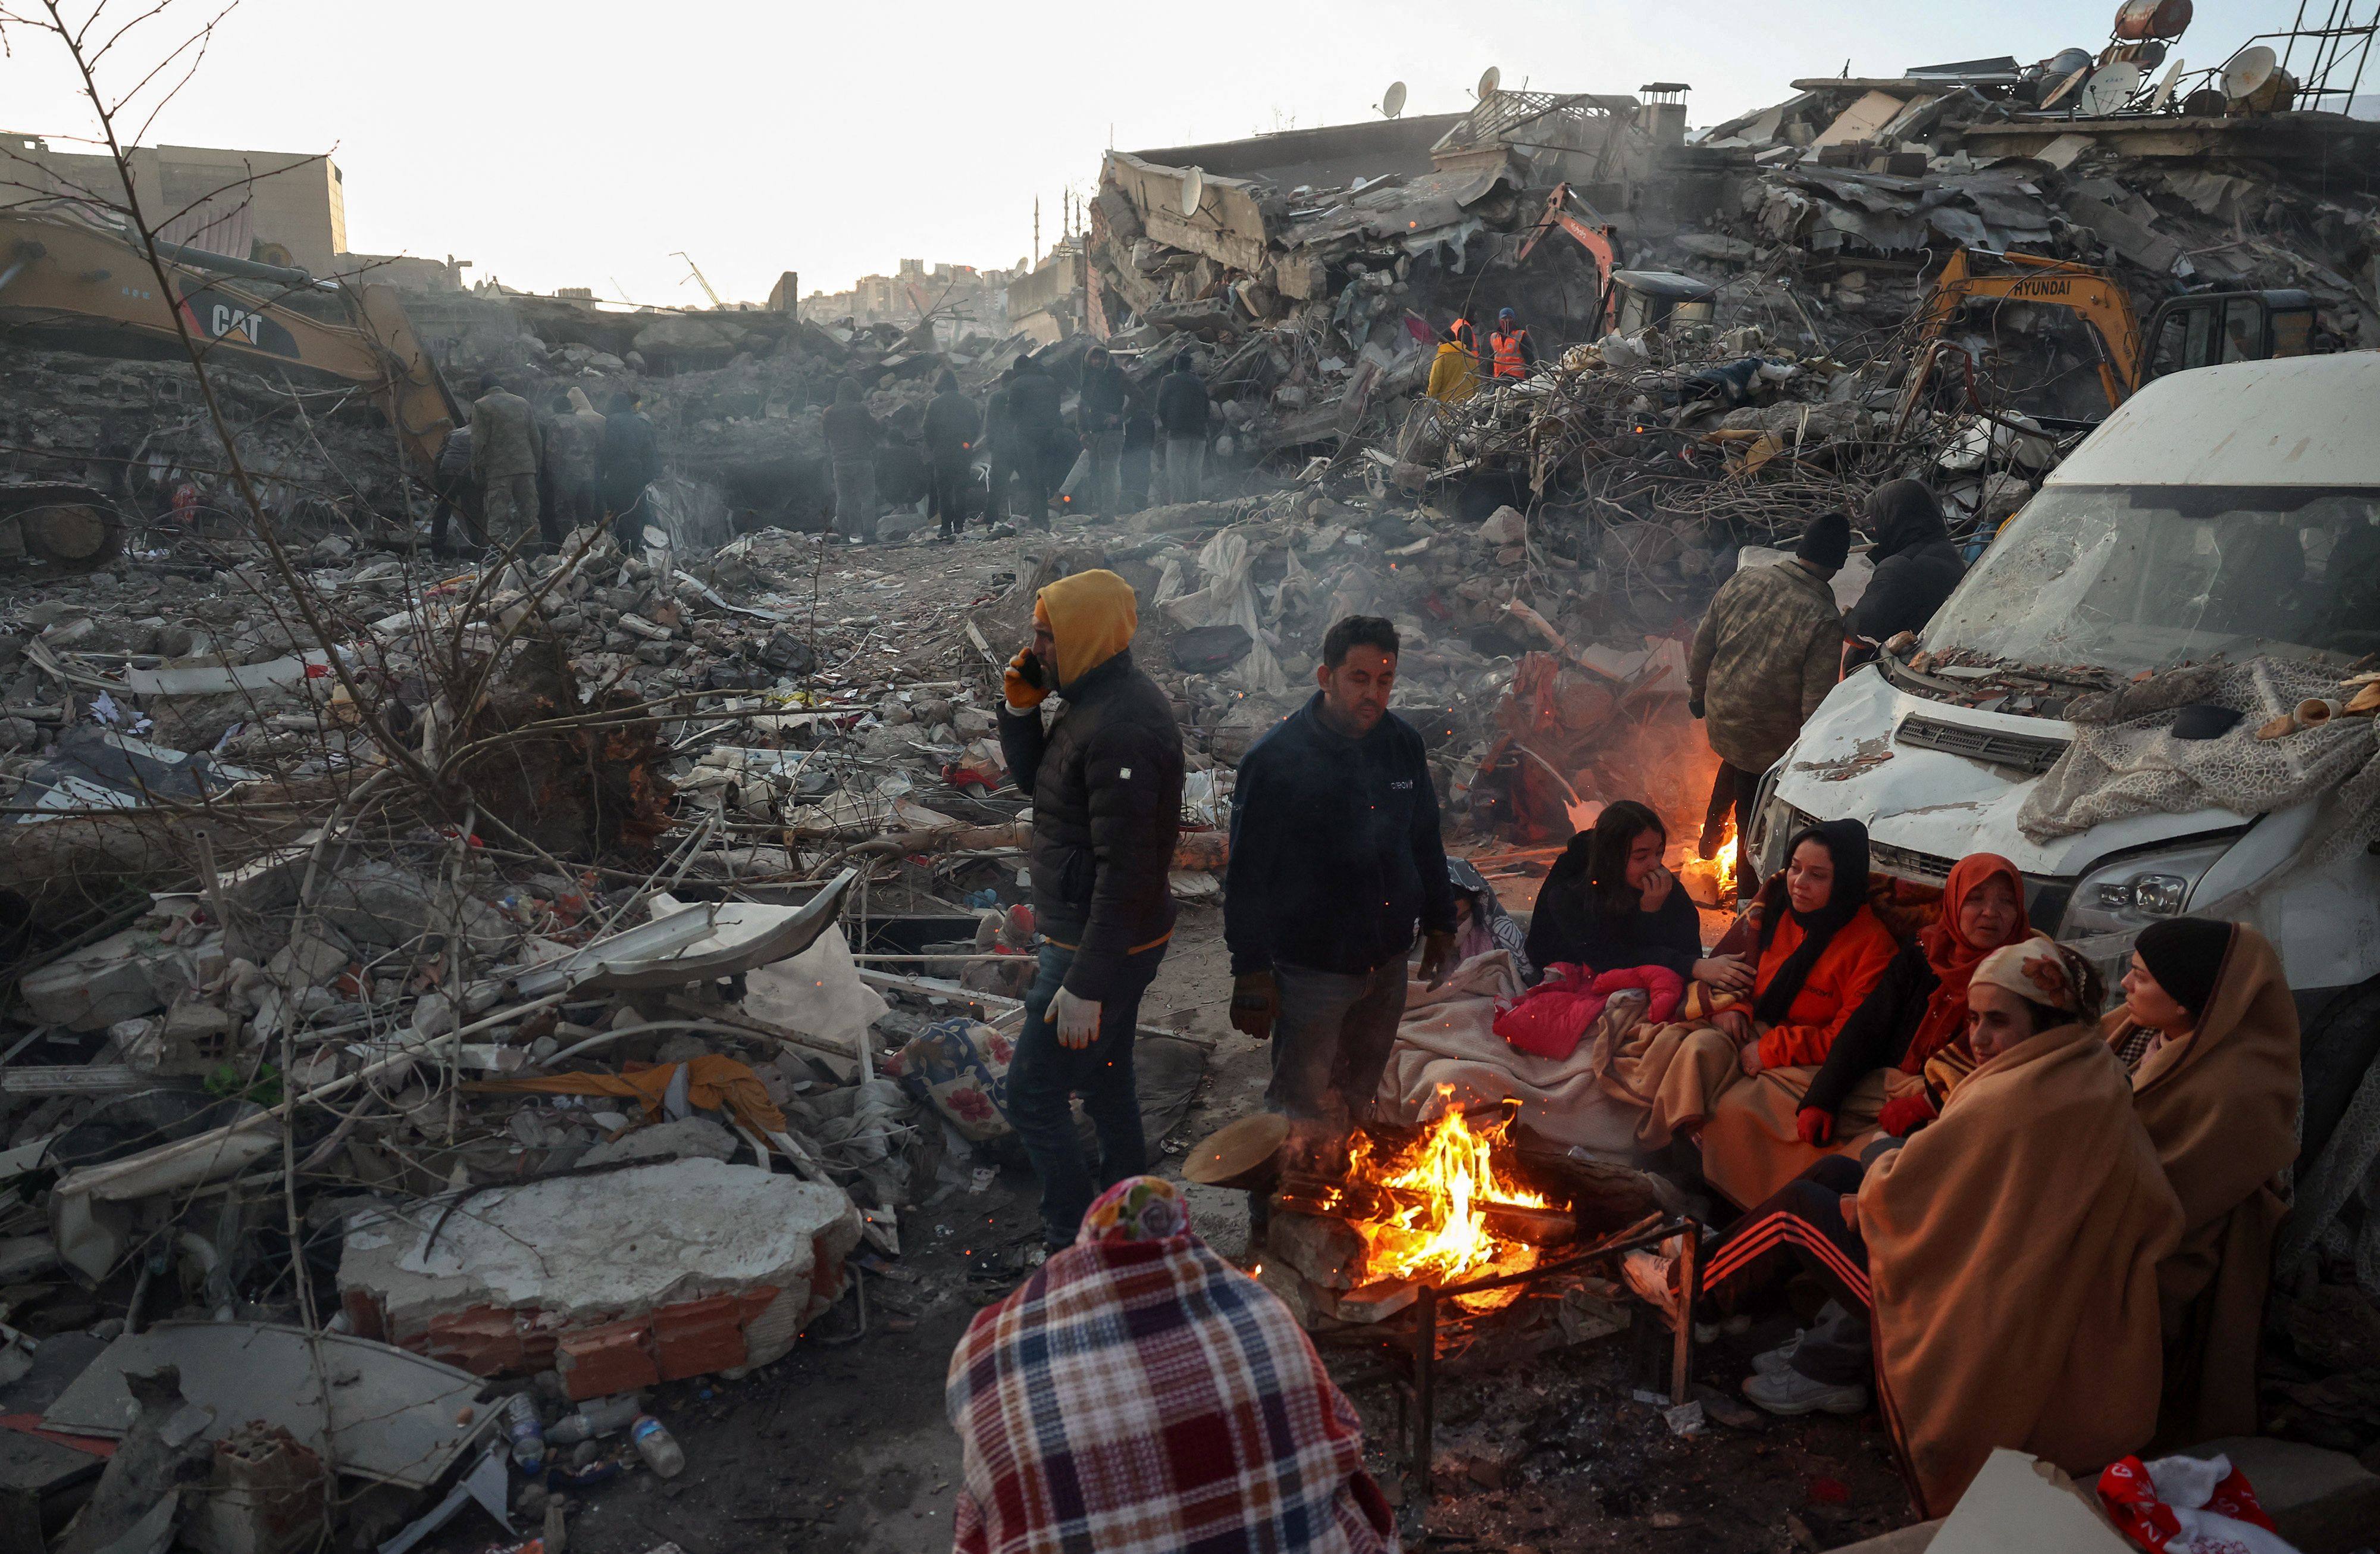 Earthquake survivors gather round a bonfire in Turkey. Might the international response to the massive tragedy improve relations between governments? Photo: AFP